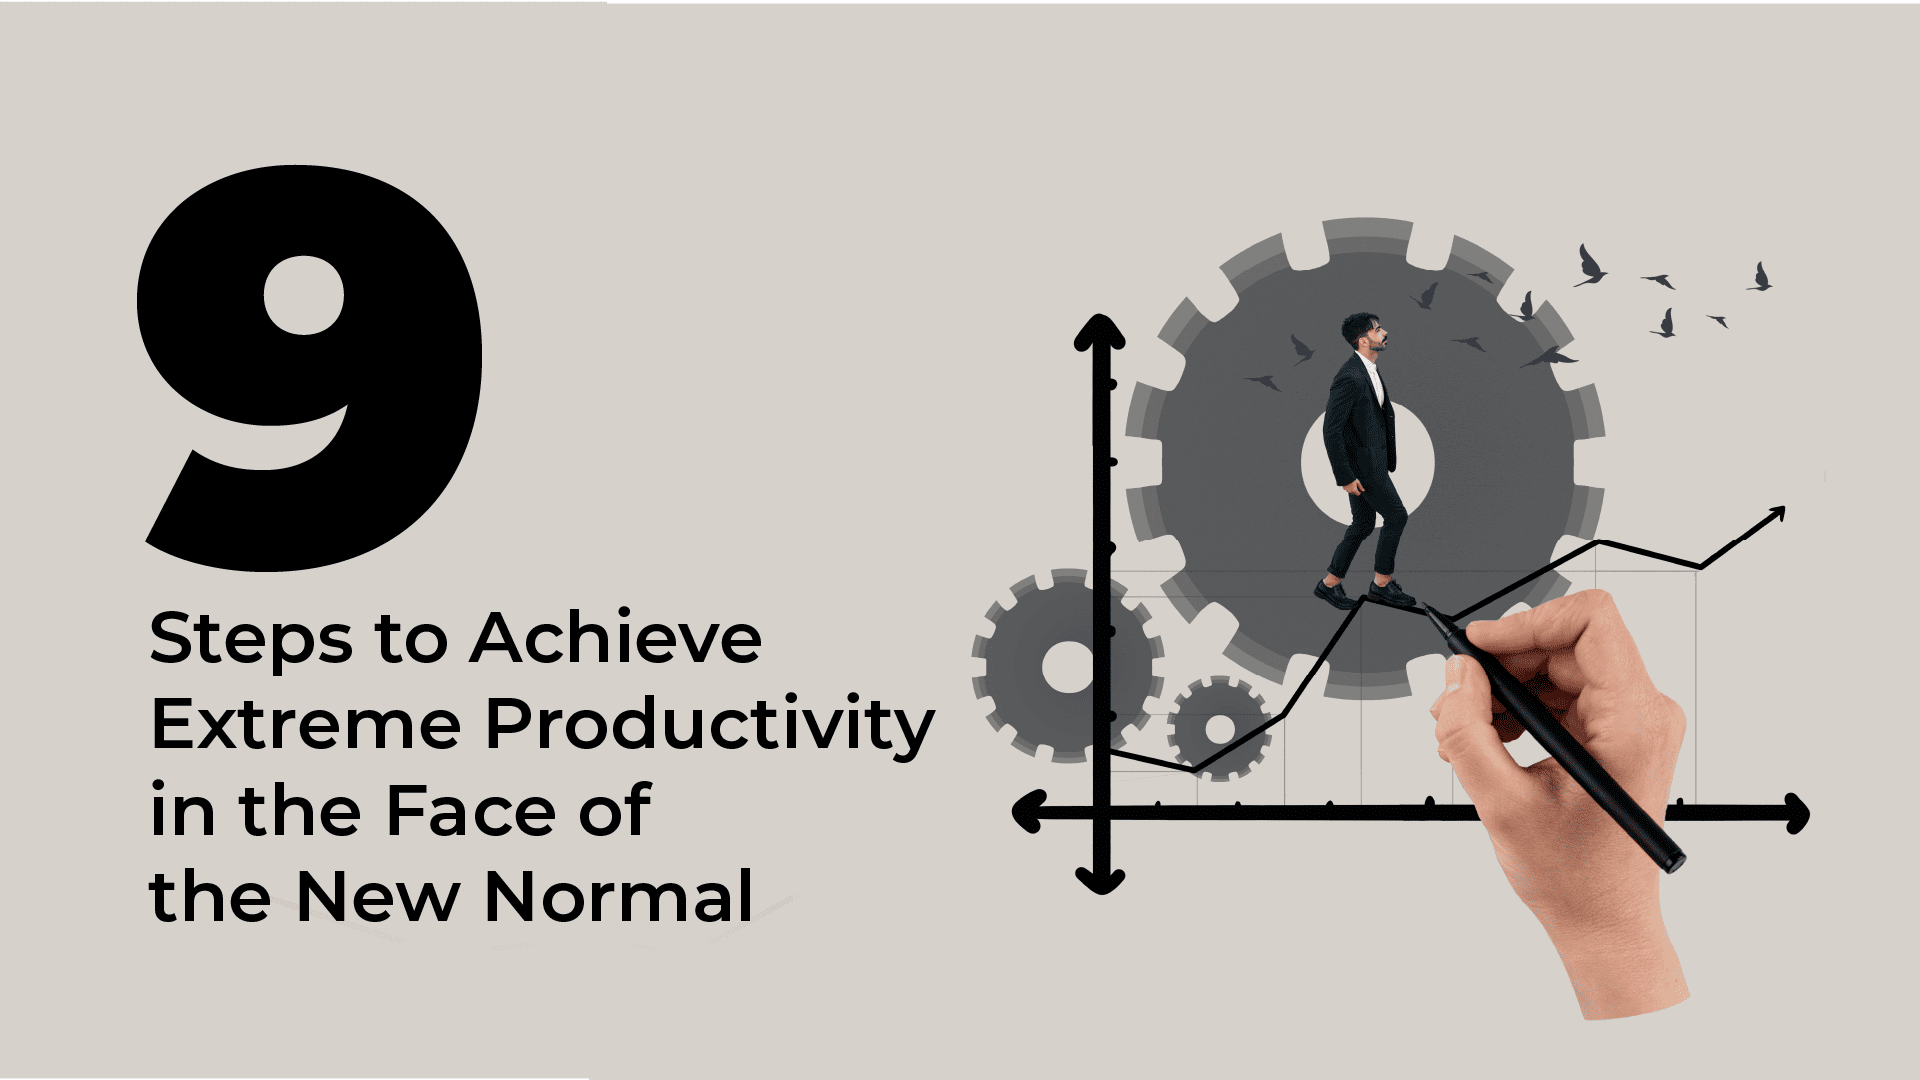 9 Steps to Achieve Extreme Productivity in the Face of the New Normal